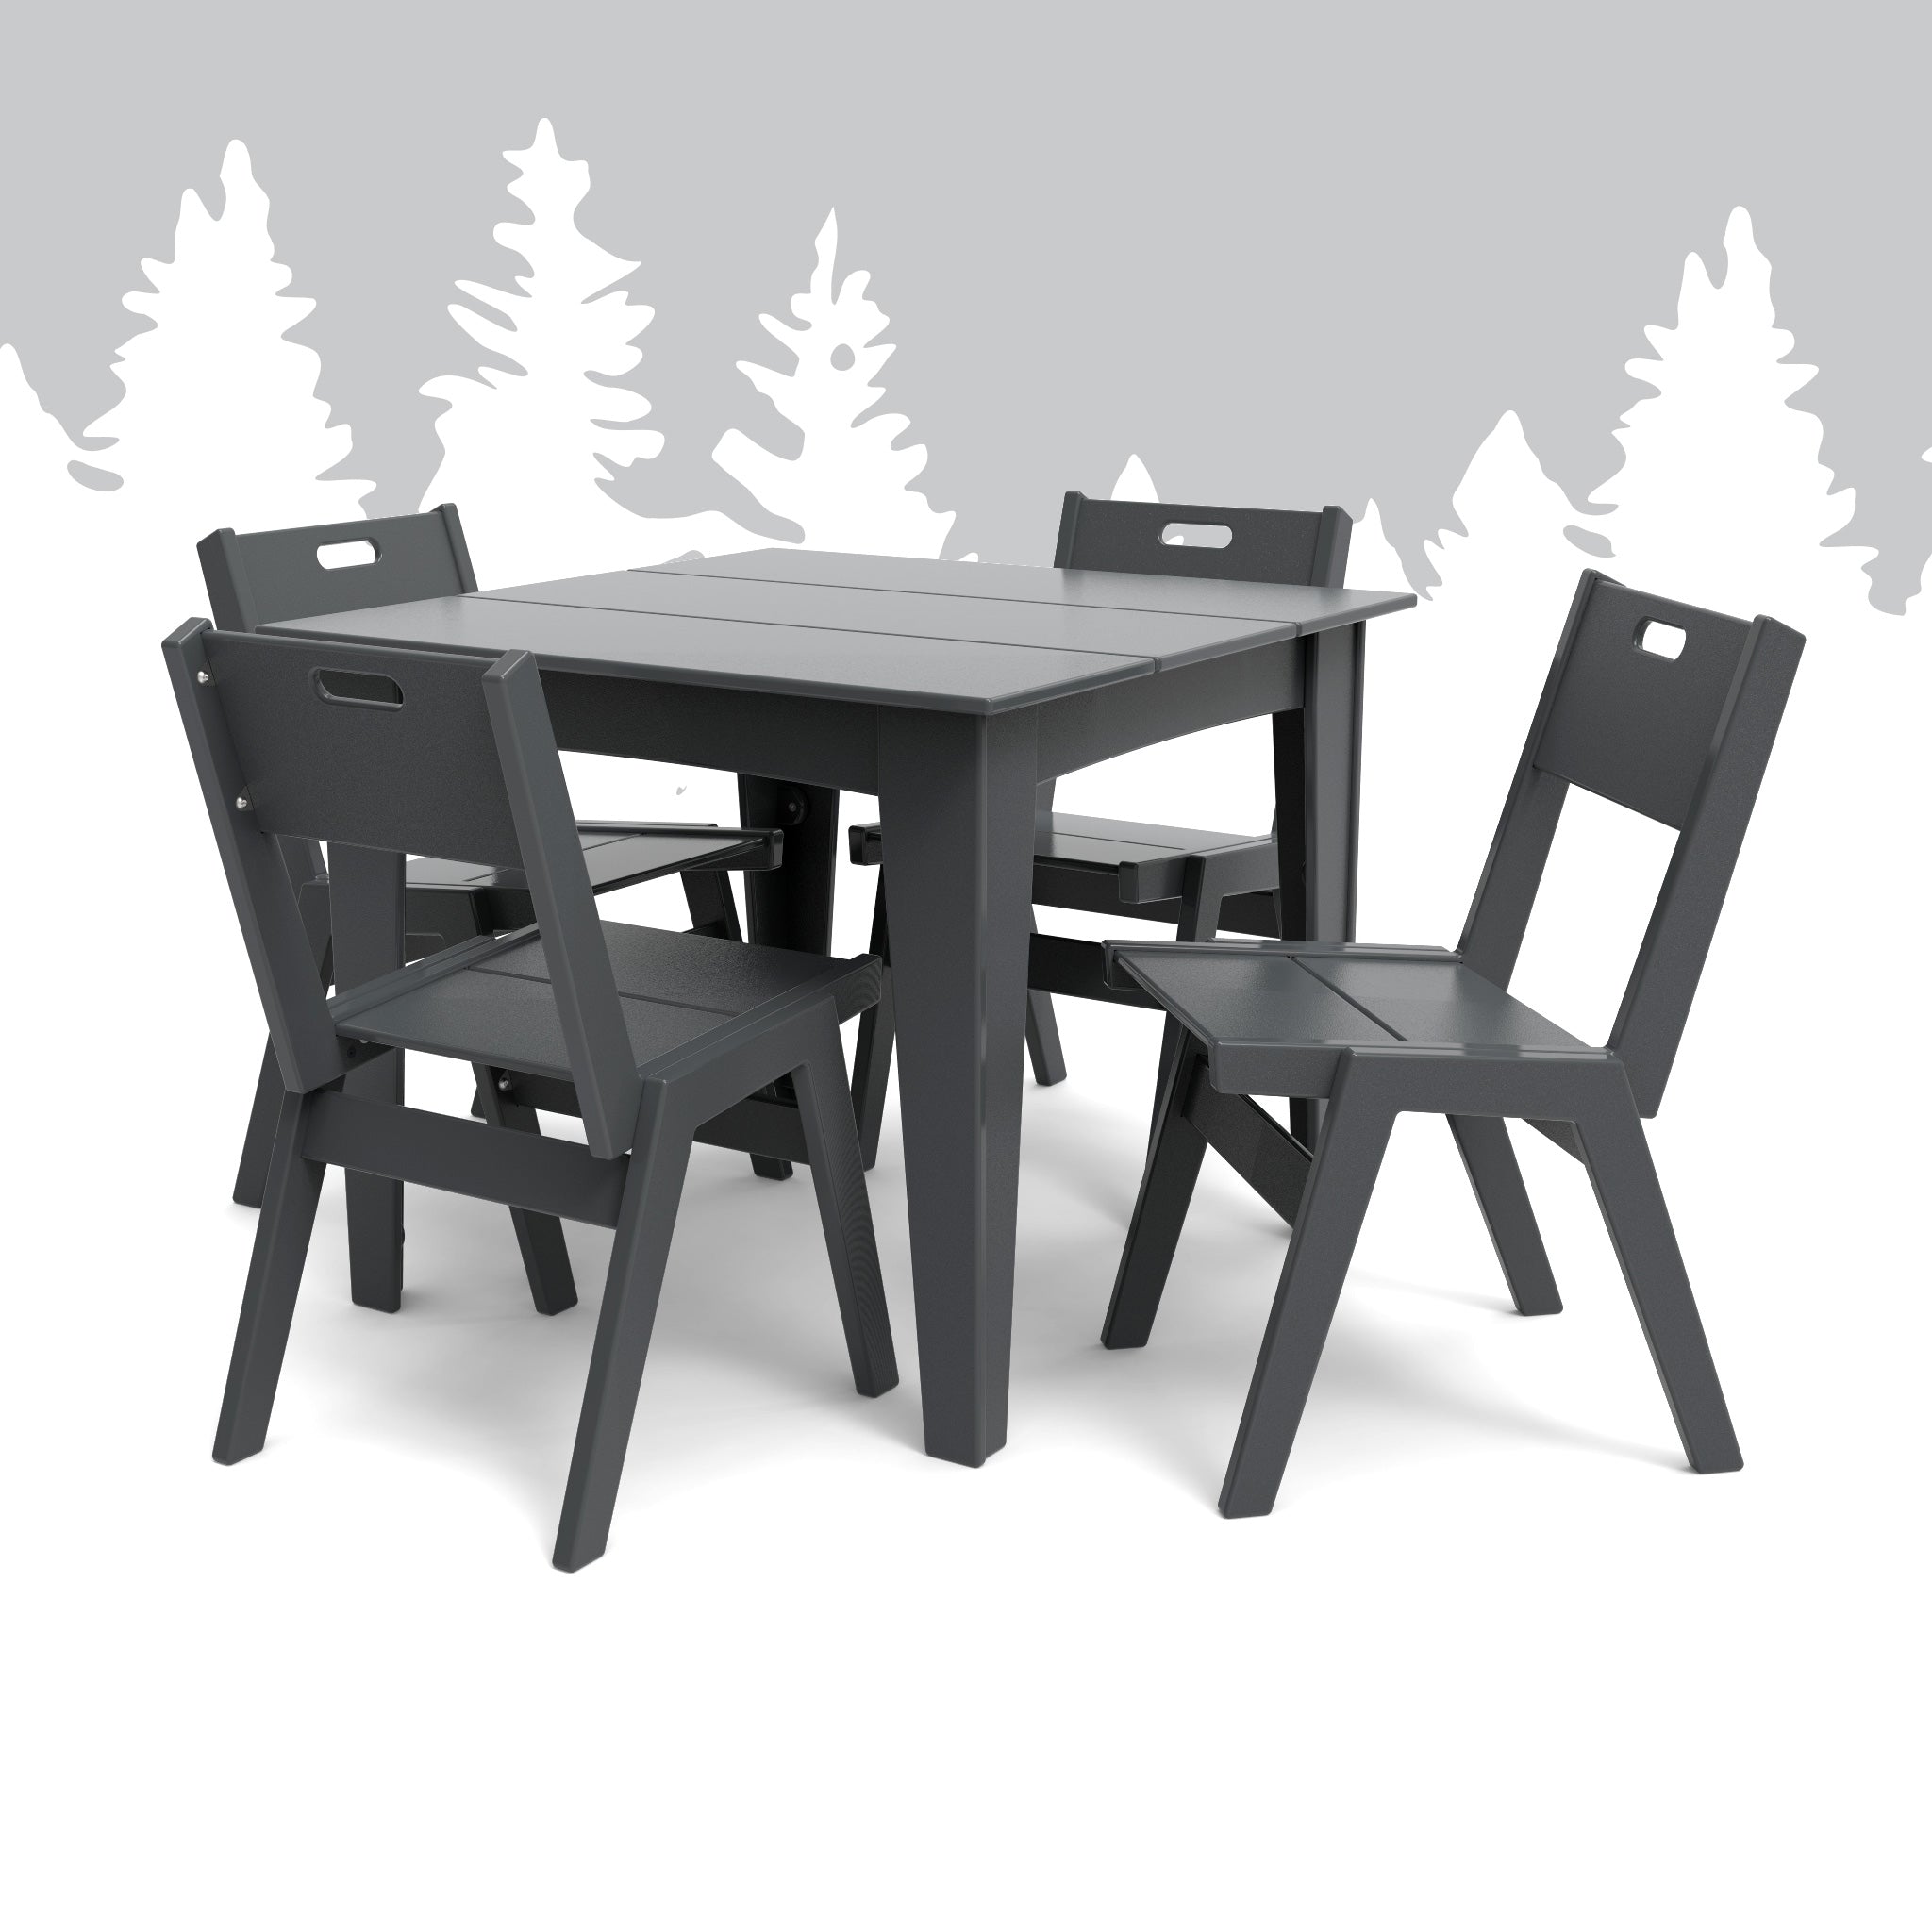 Alfresco Square Table (36) + Alfresco Dining Chairs w/ Handle Charcoal Bundle